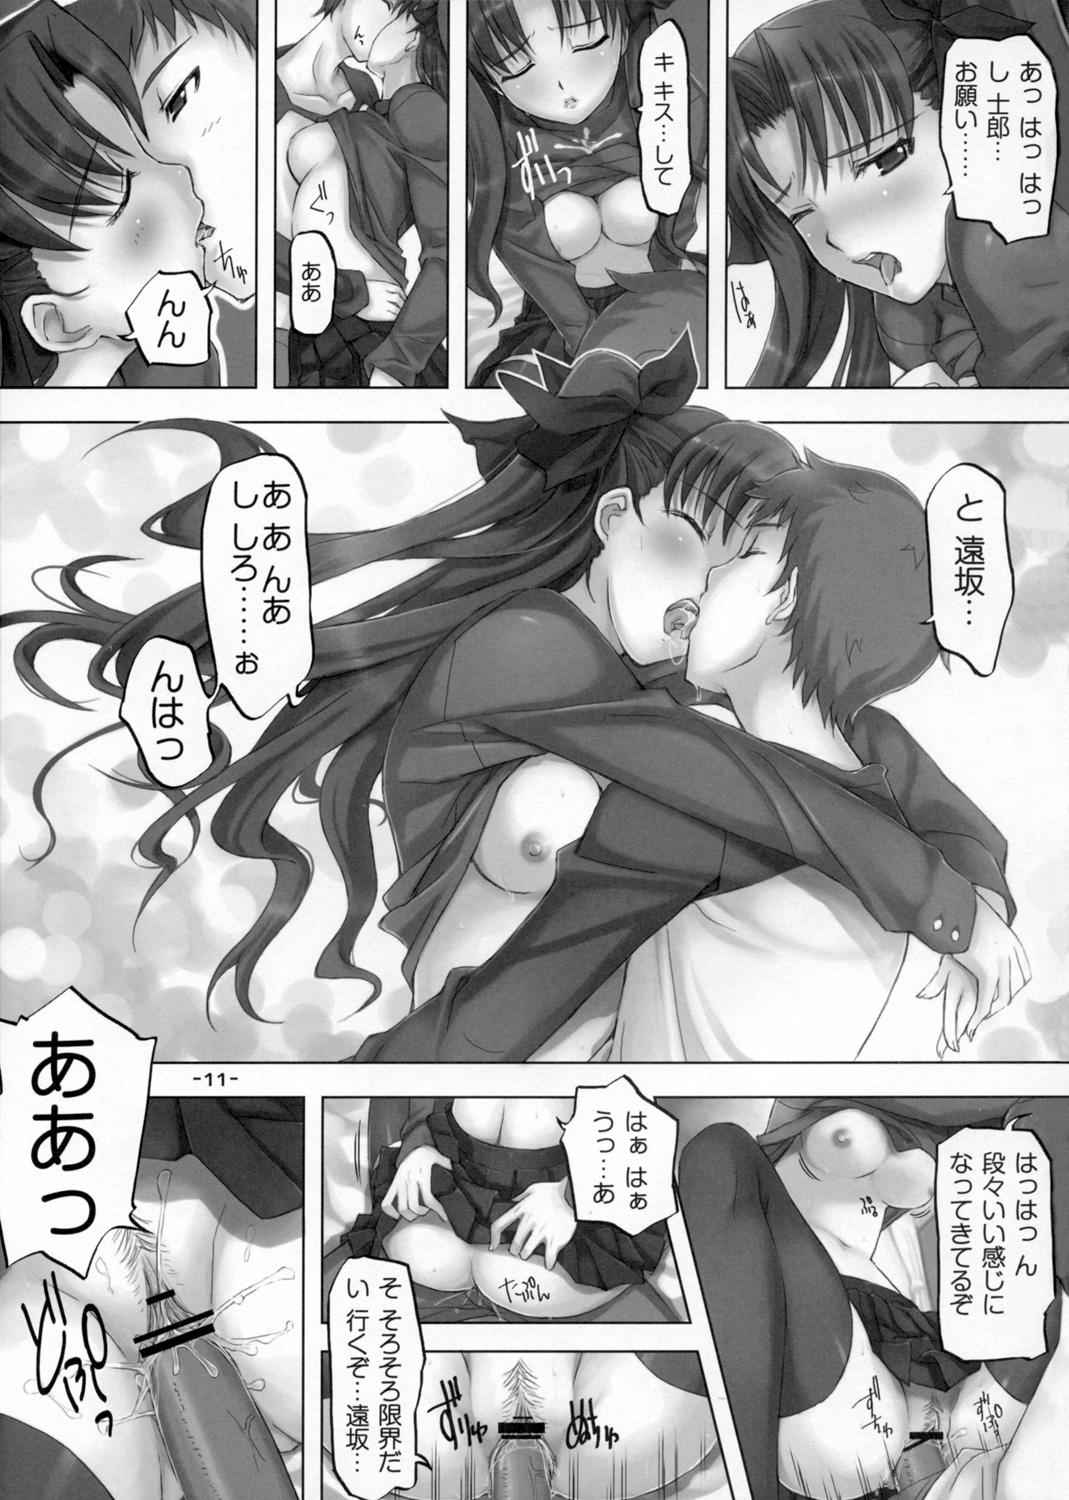 Dicksucking DAILY LIFE - Fate stay night Fate hollow ataraxia Family - Page 10